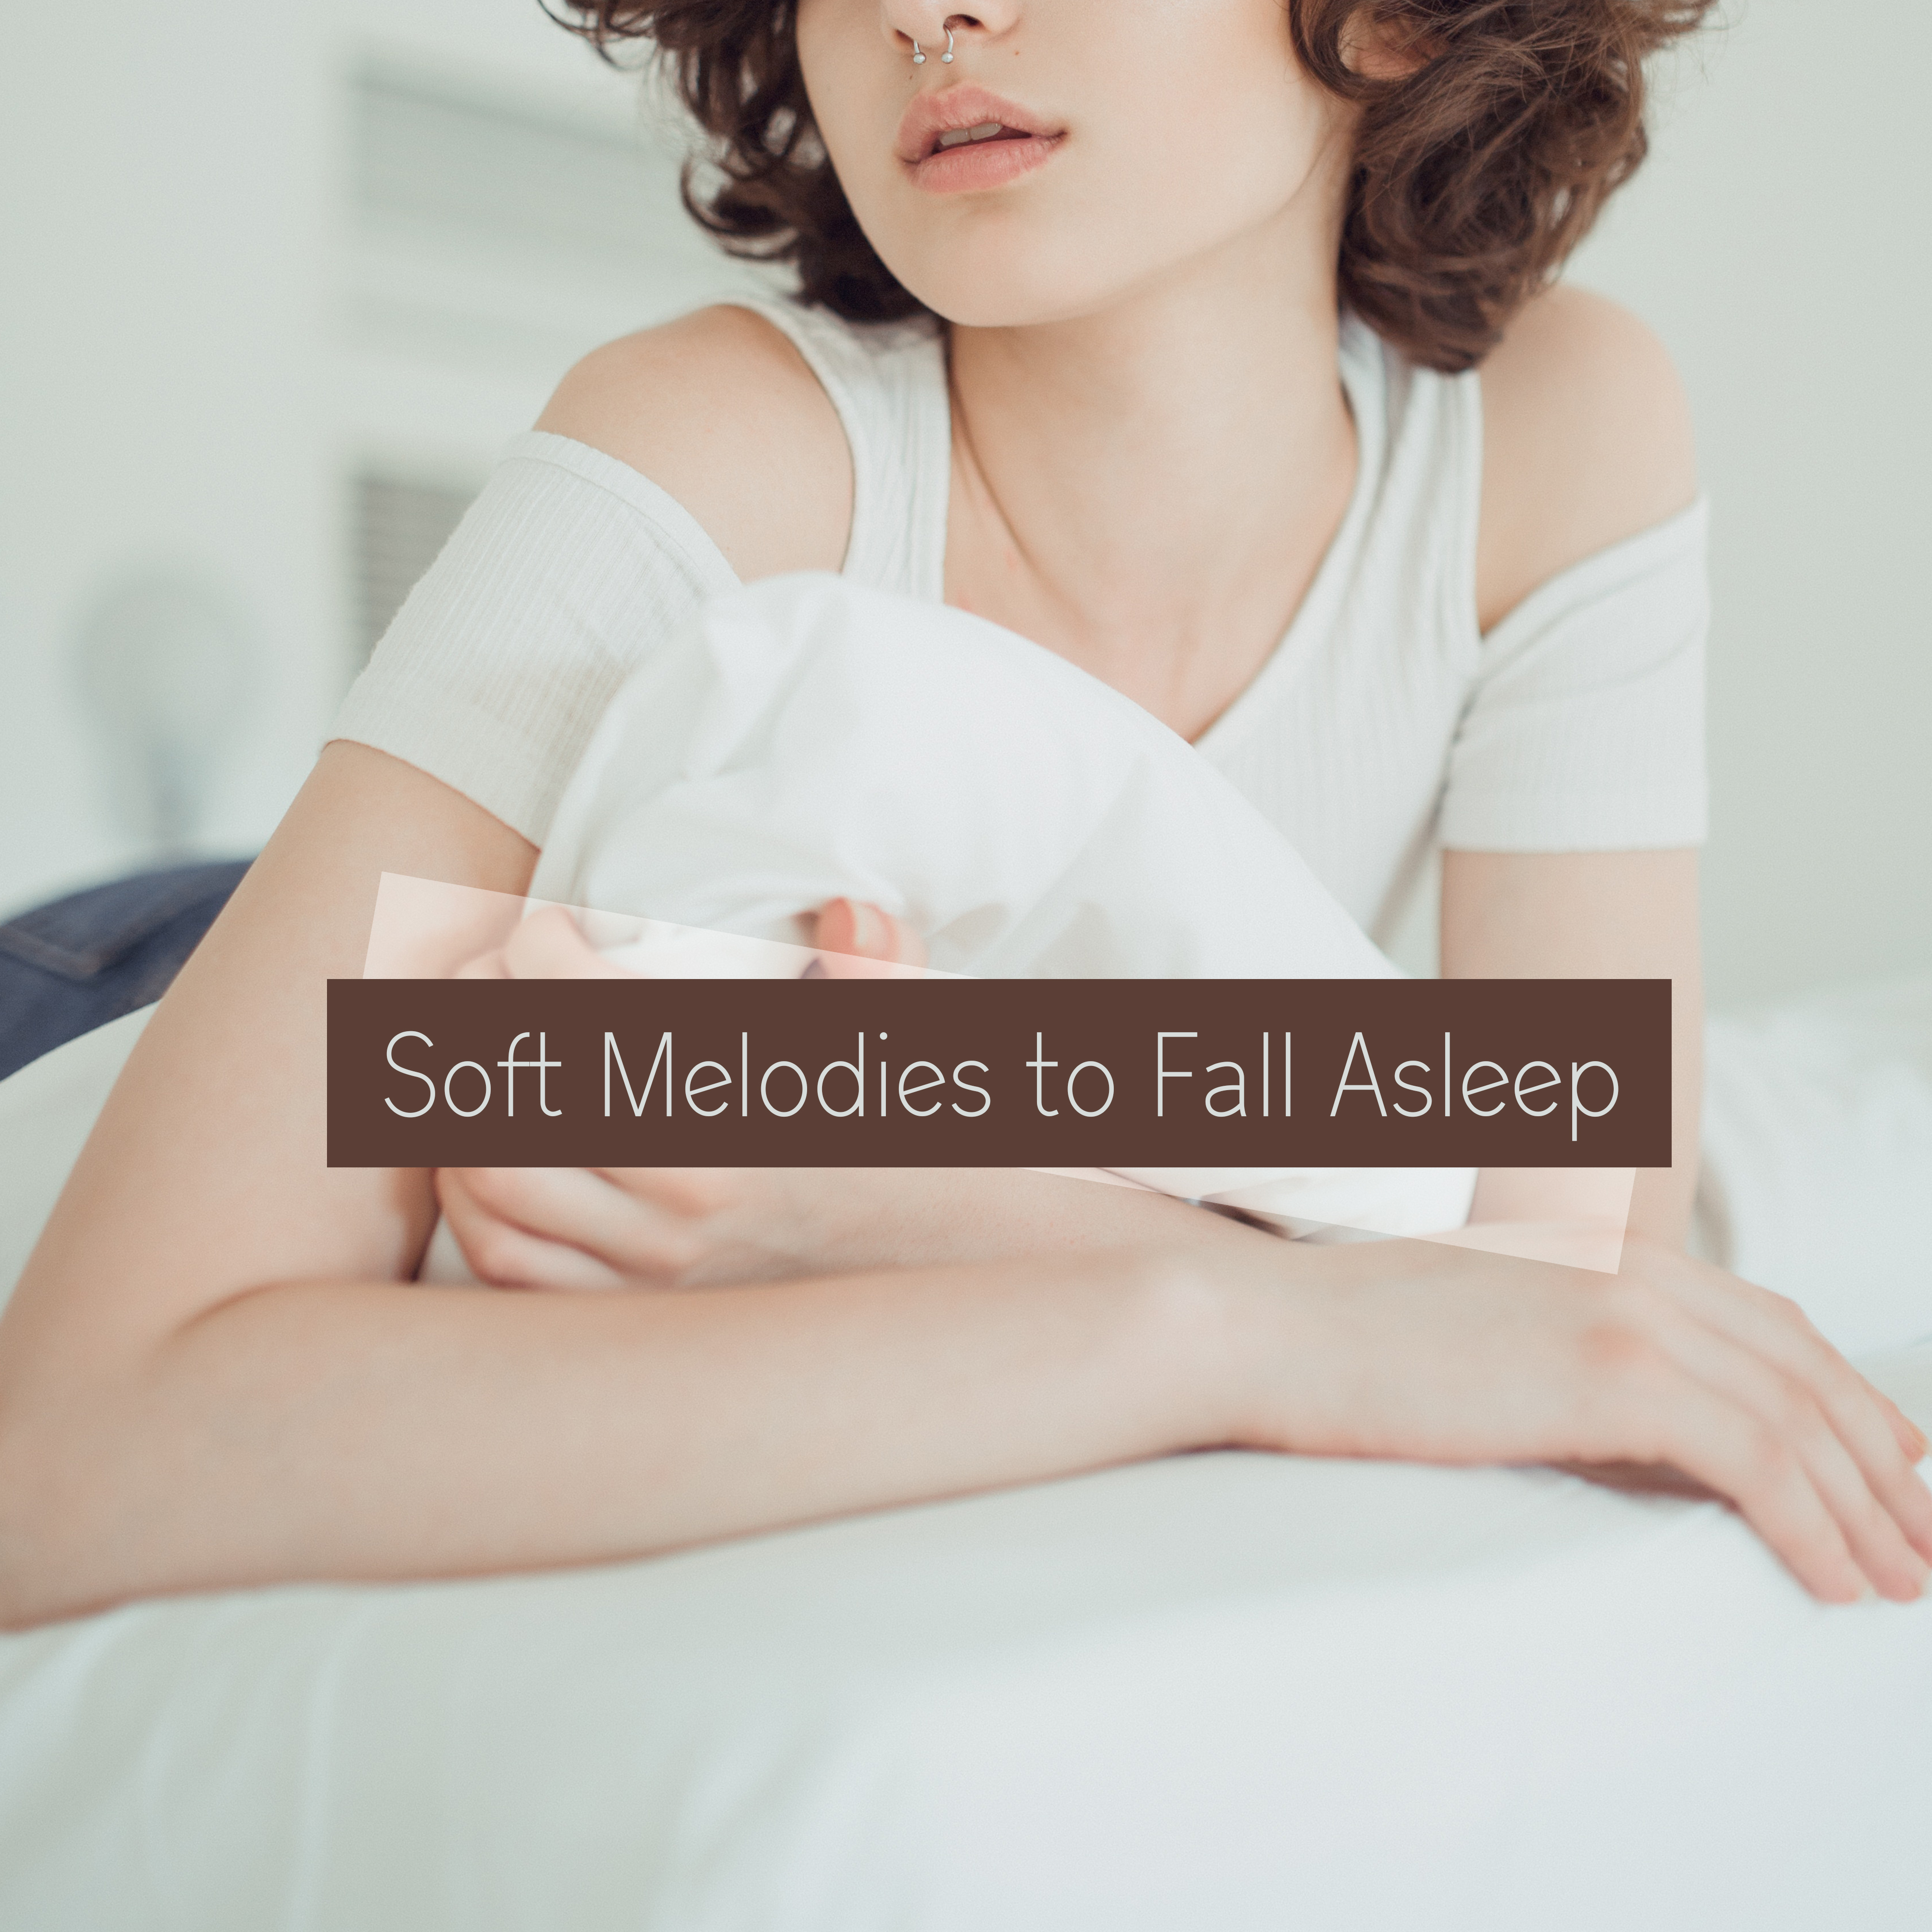 Soft Melodies to Fall Asleep: Gentle Music Helpful while Falling Asleep, Relaxing and Soothing